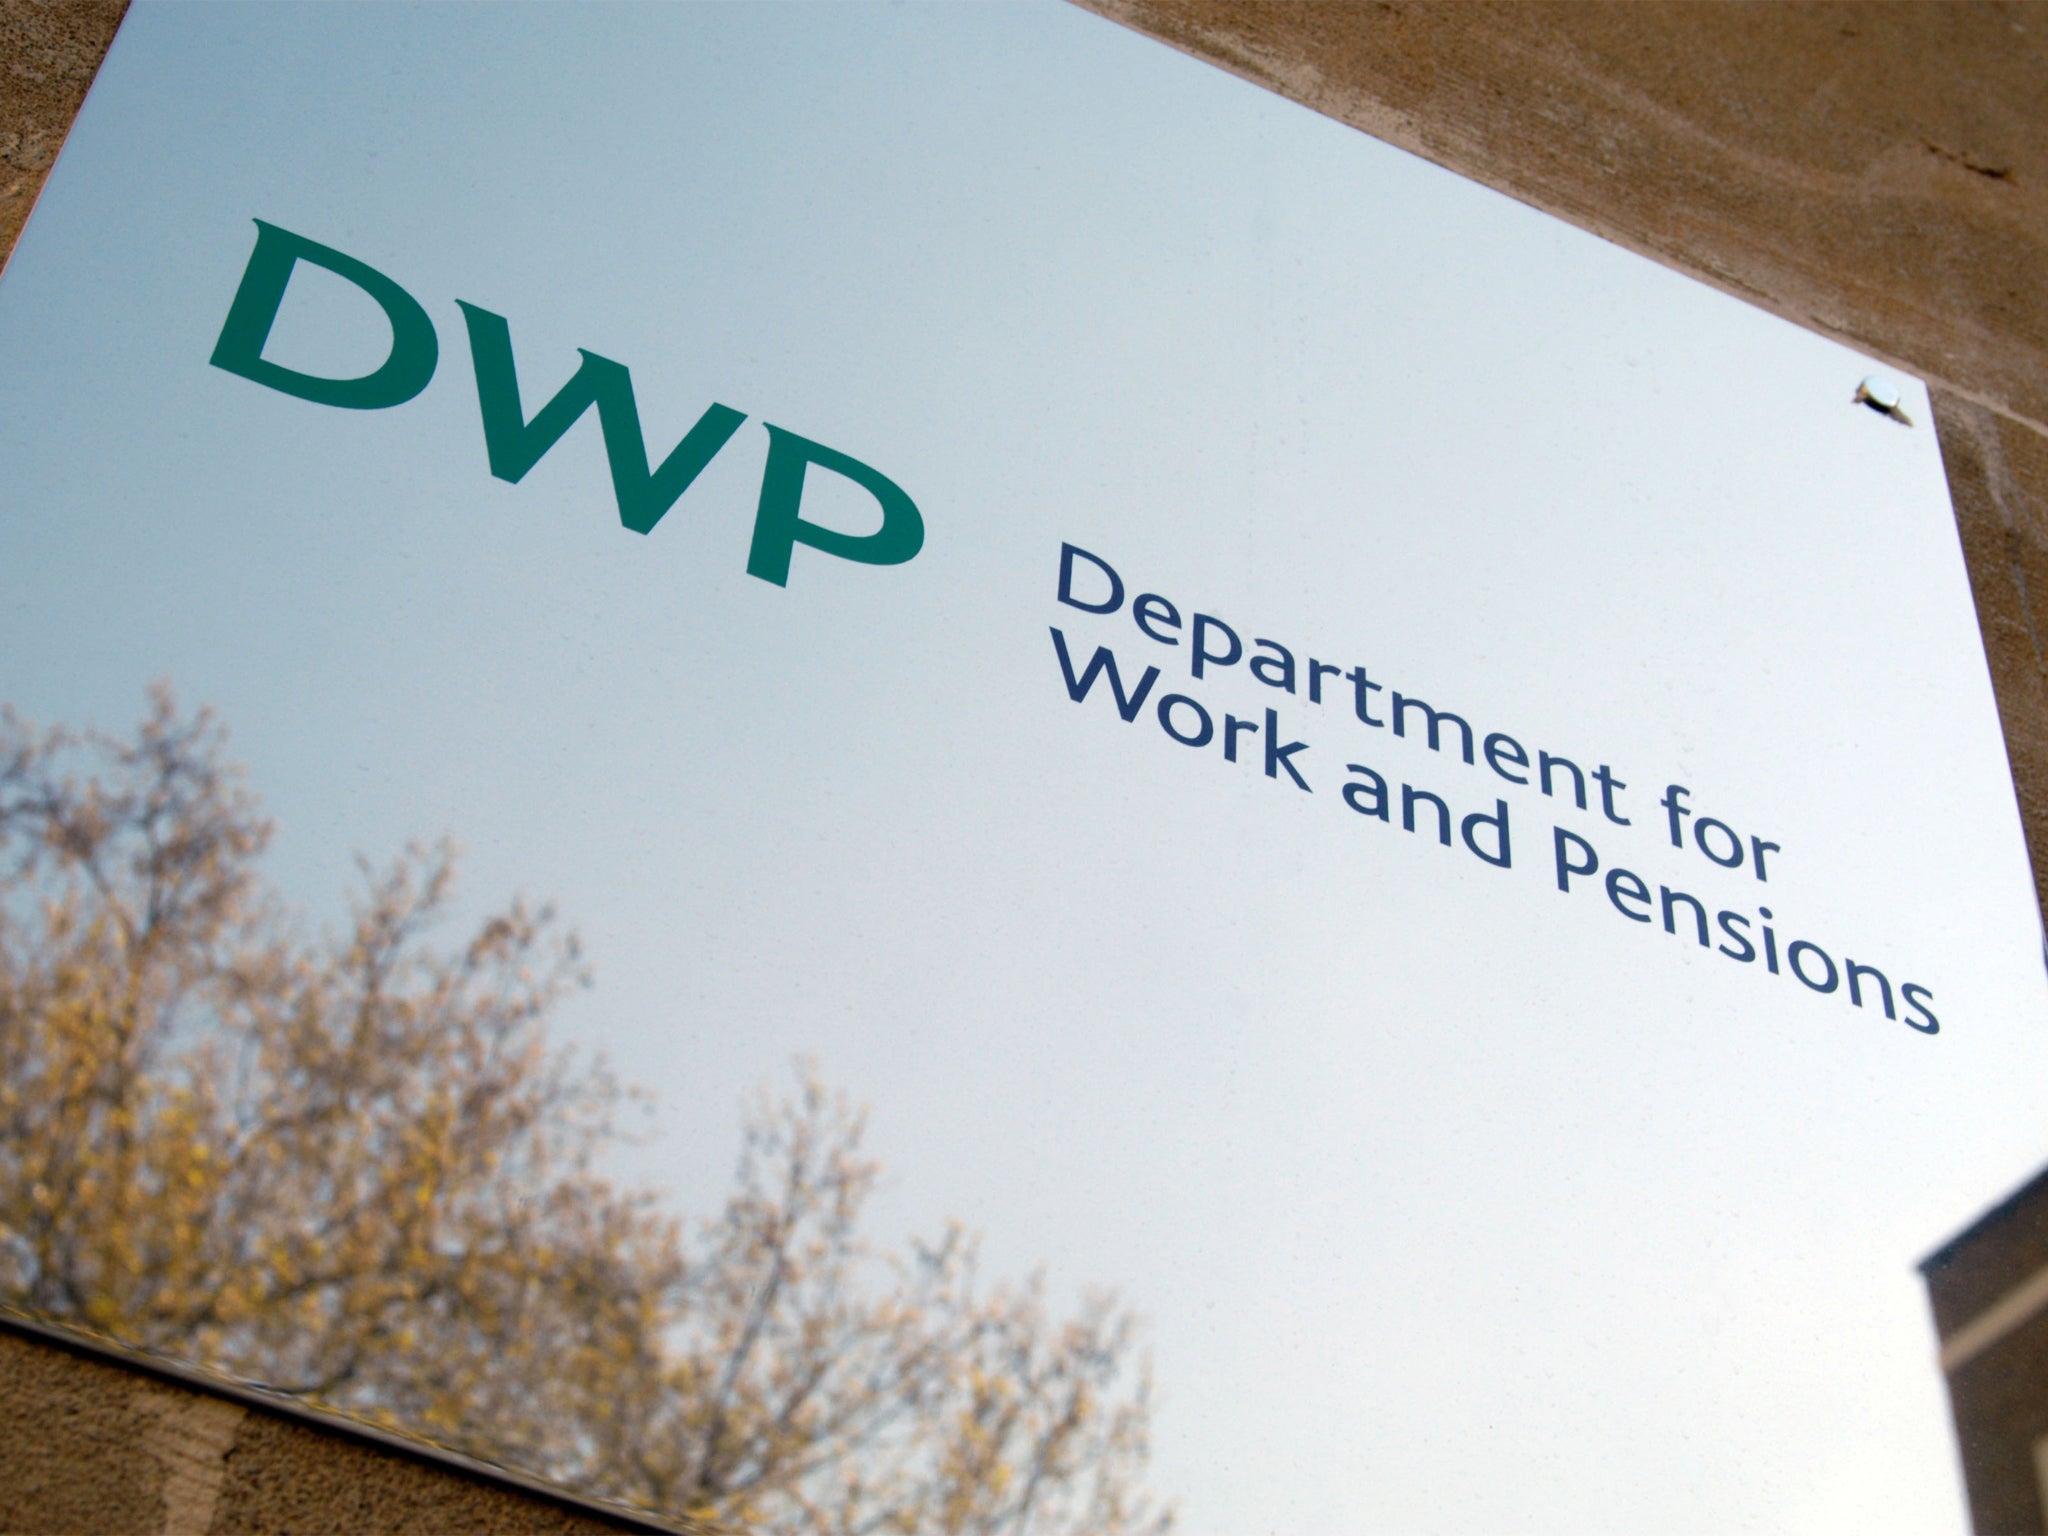 The DWP conceded the day before a scheduled court hearing and agreed to rewrite its policies